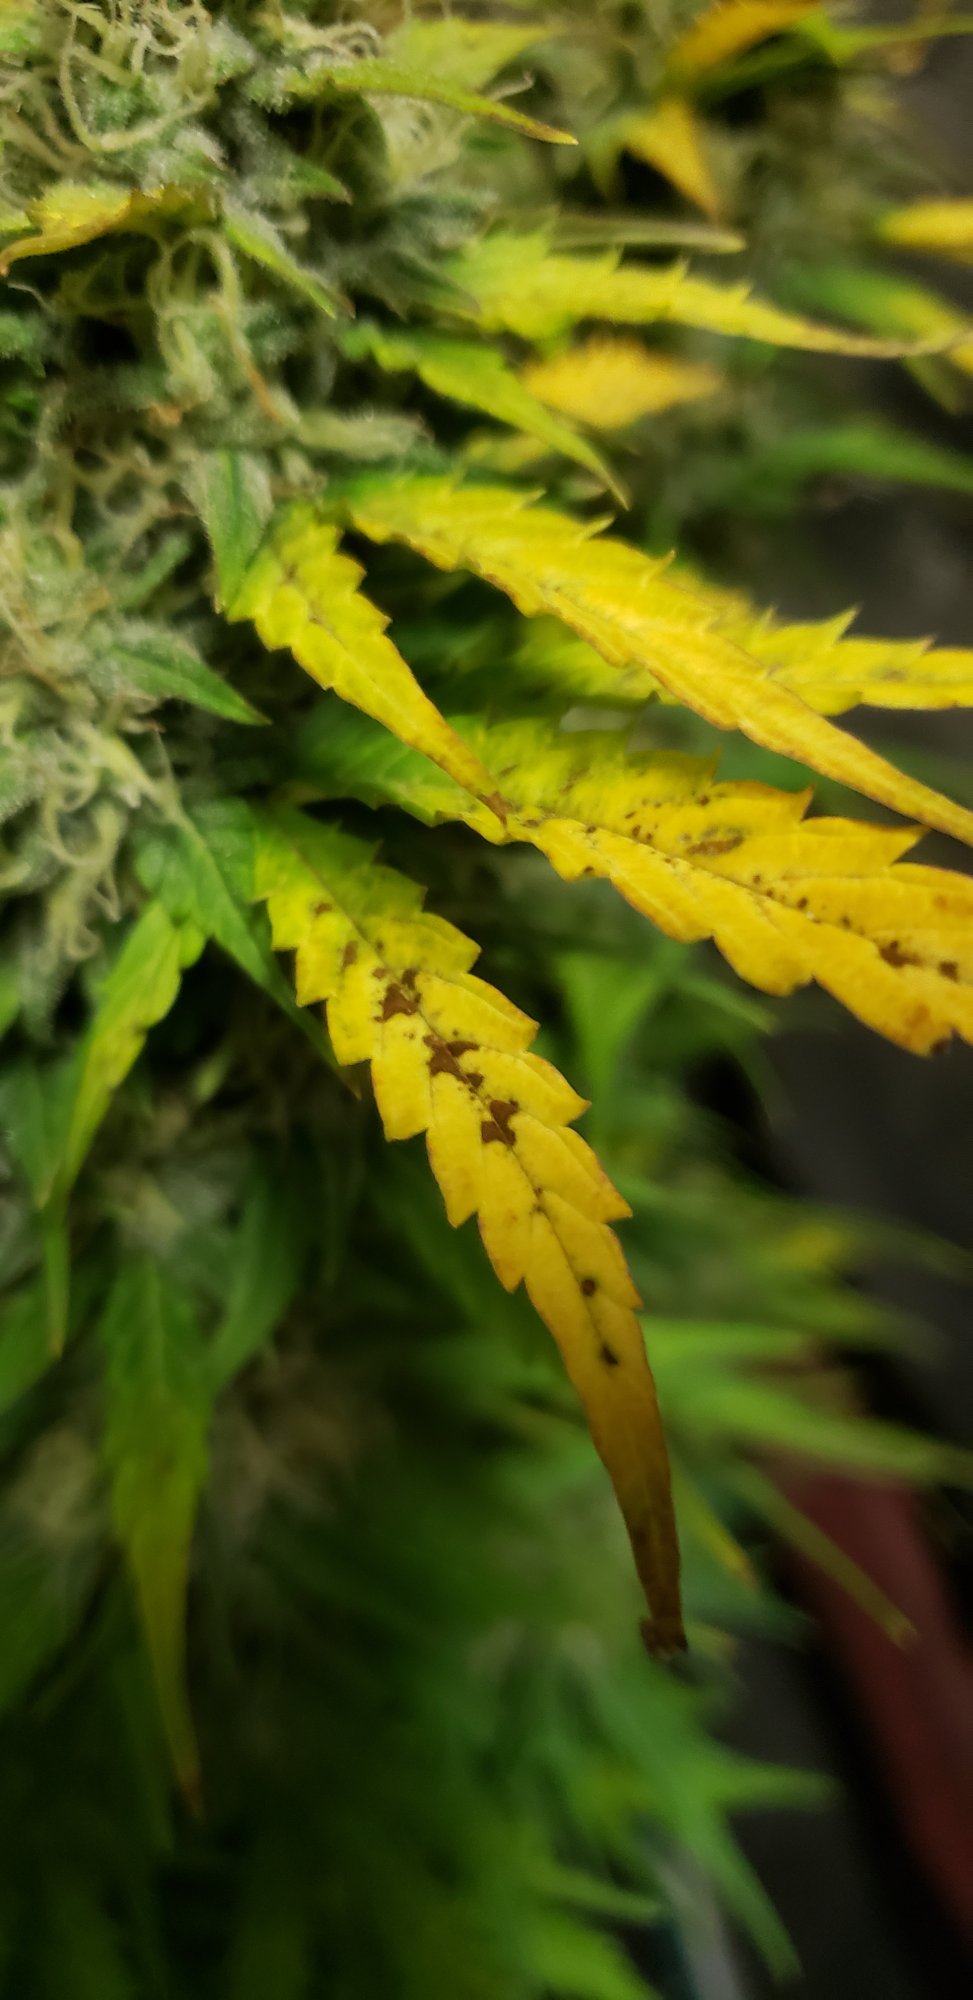 Yellowing upper leaves with dark spots 2